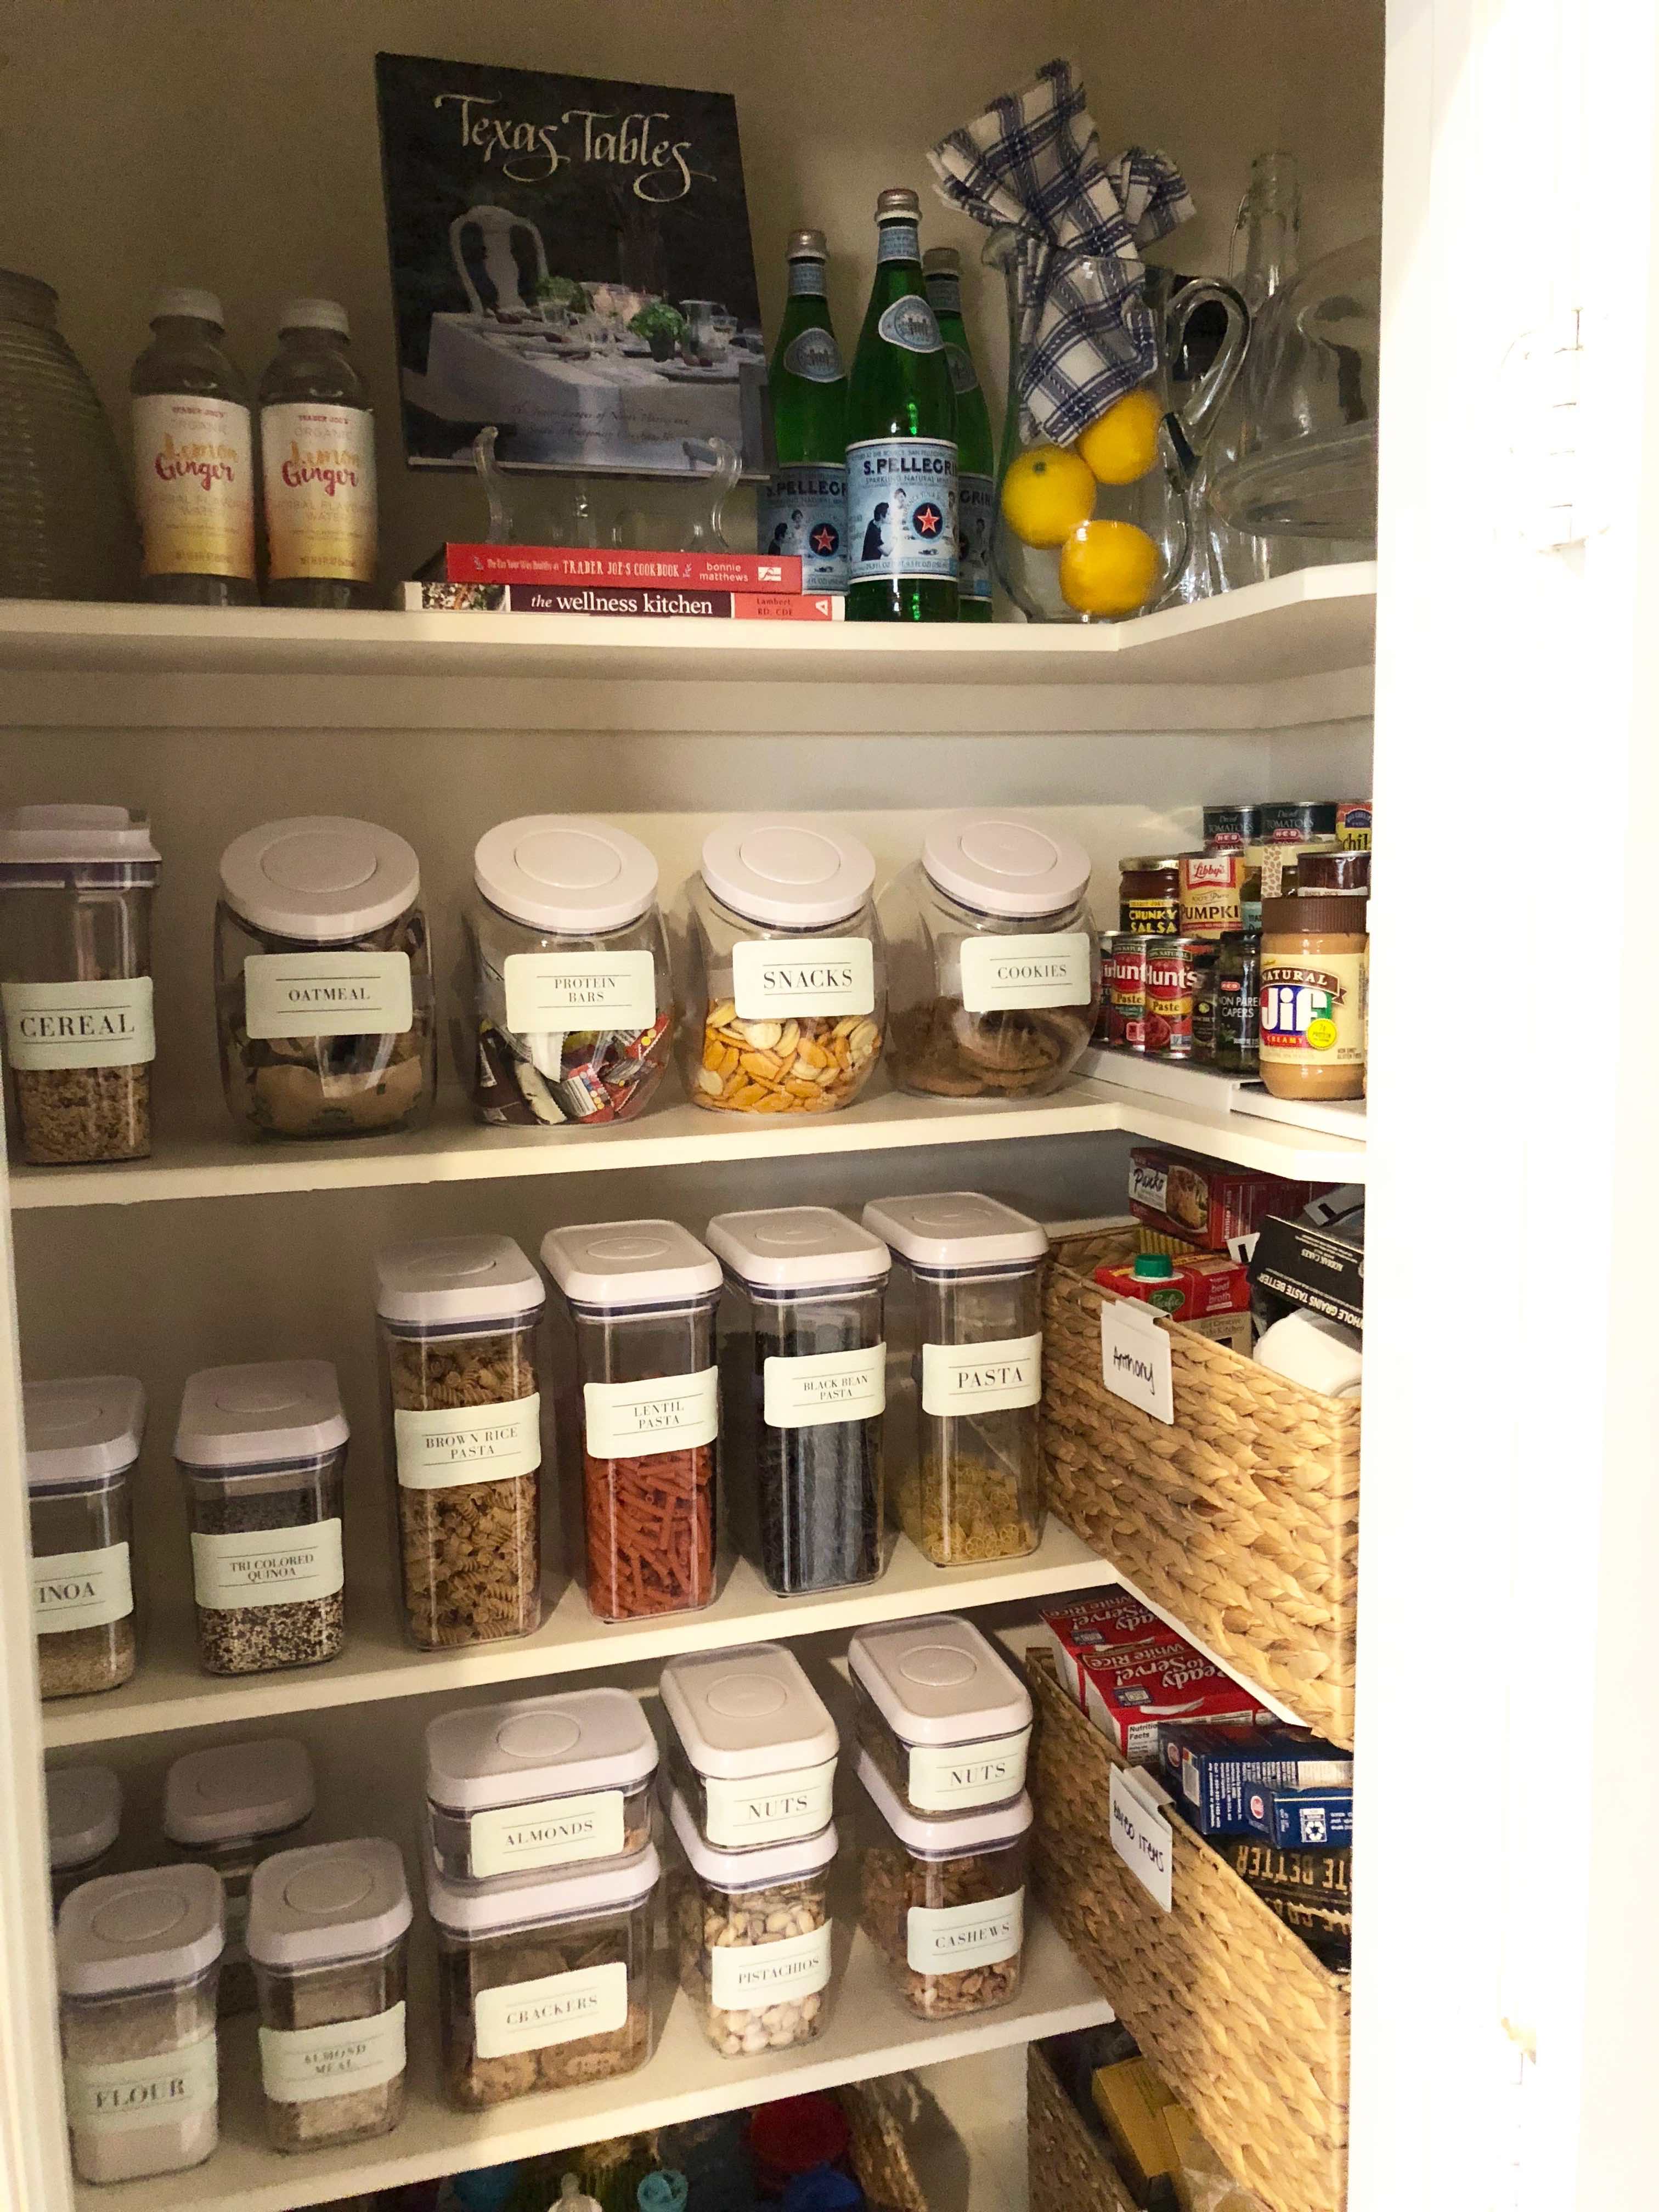 How To Label Pantry Containers - The Organised Housewife